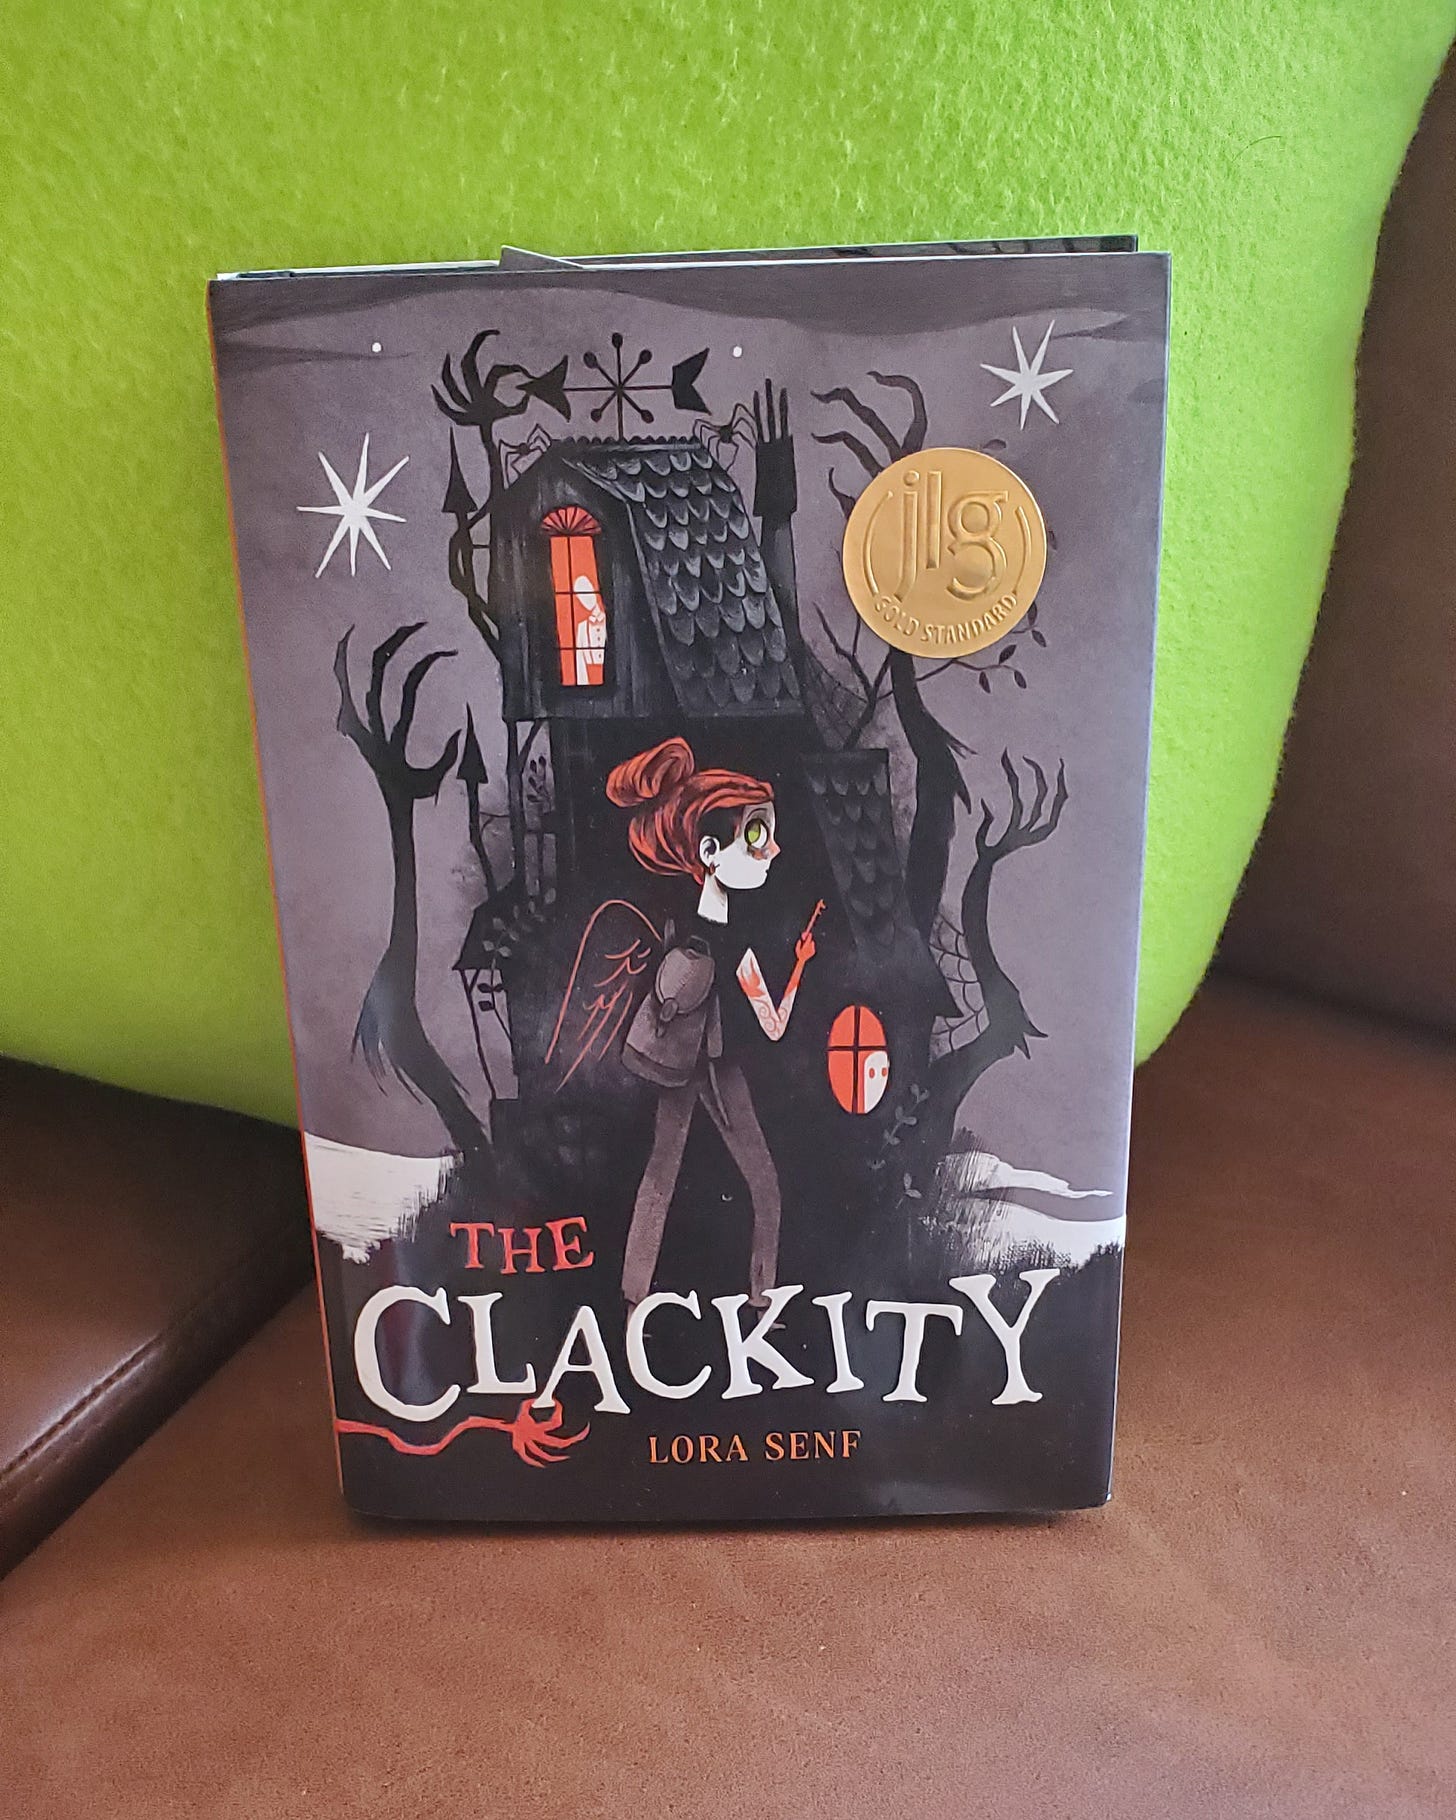 A young girl with red hair and light skin with a backpack and key in her hand walks in front of a black two-story house, with arms coming out of the house referring to the book’s title, “The Clackity” by Lora Senf. 